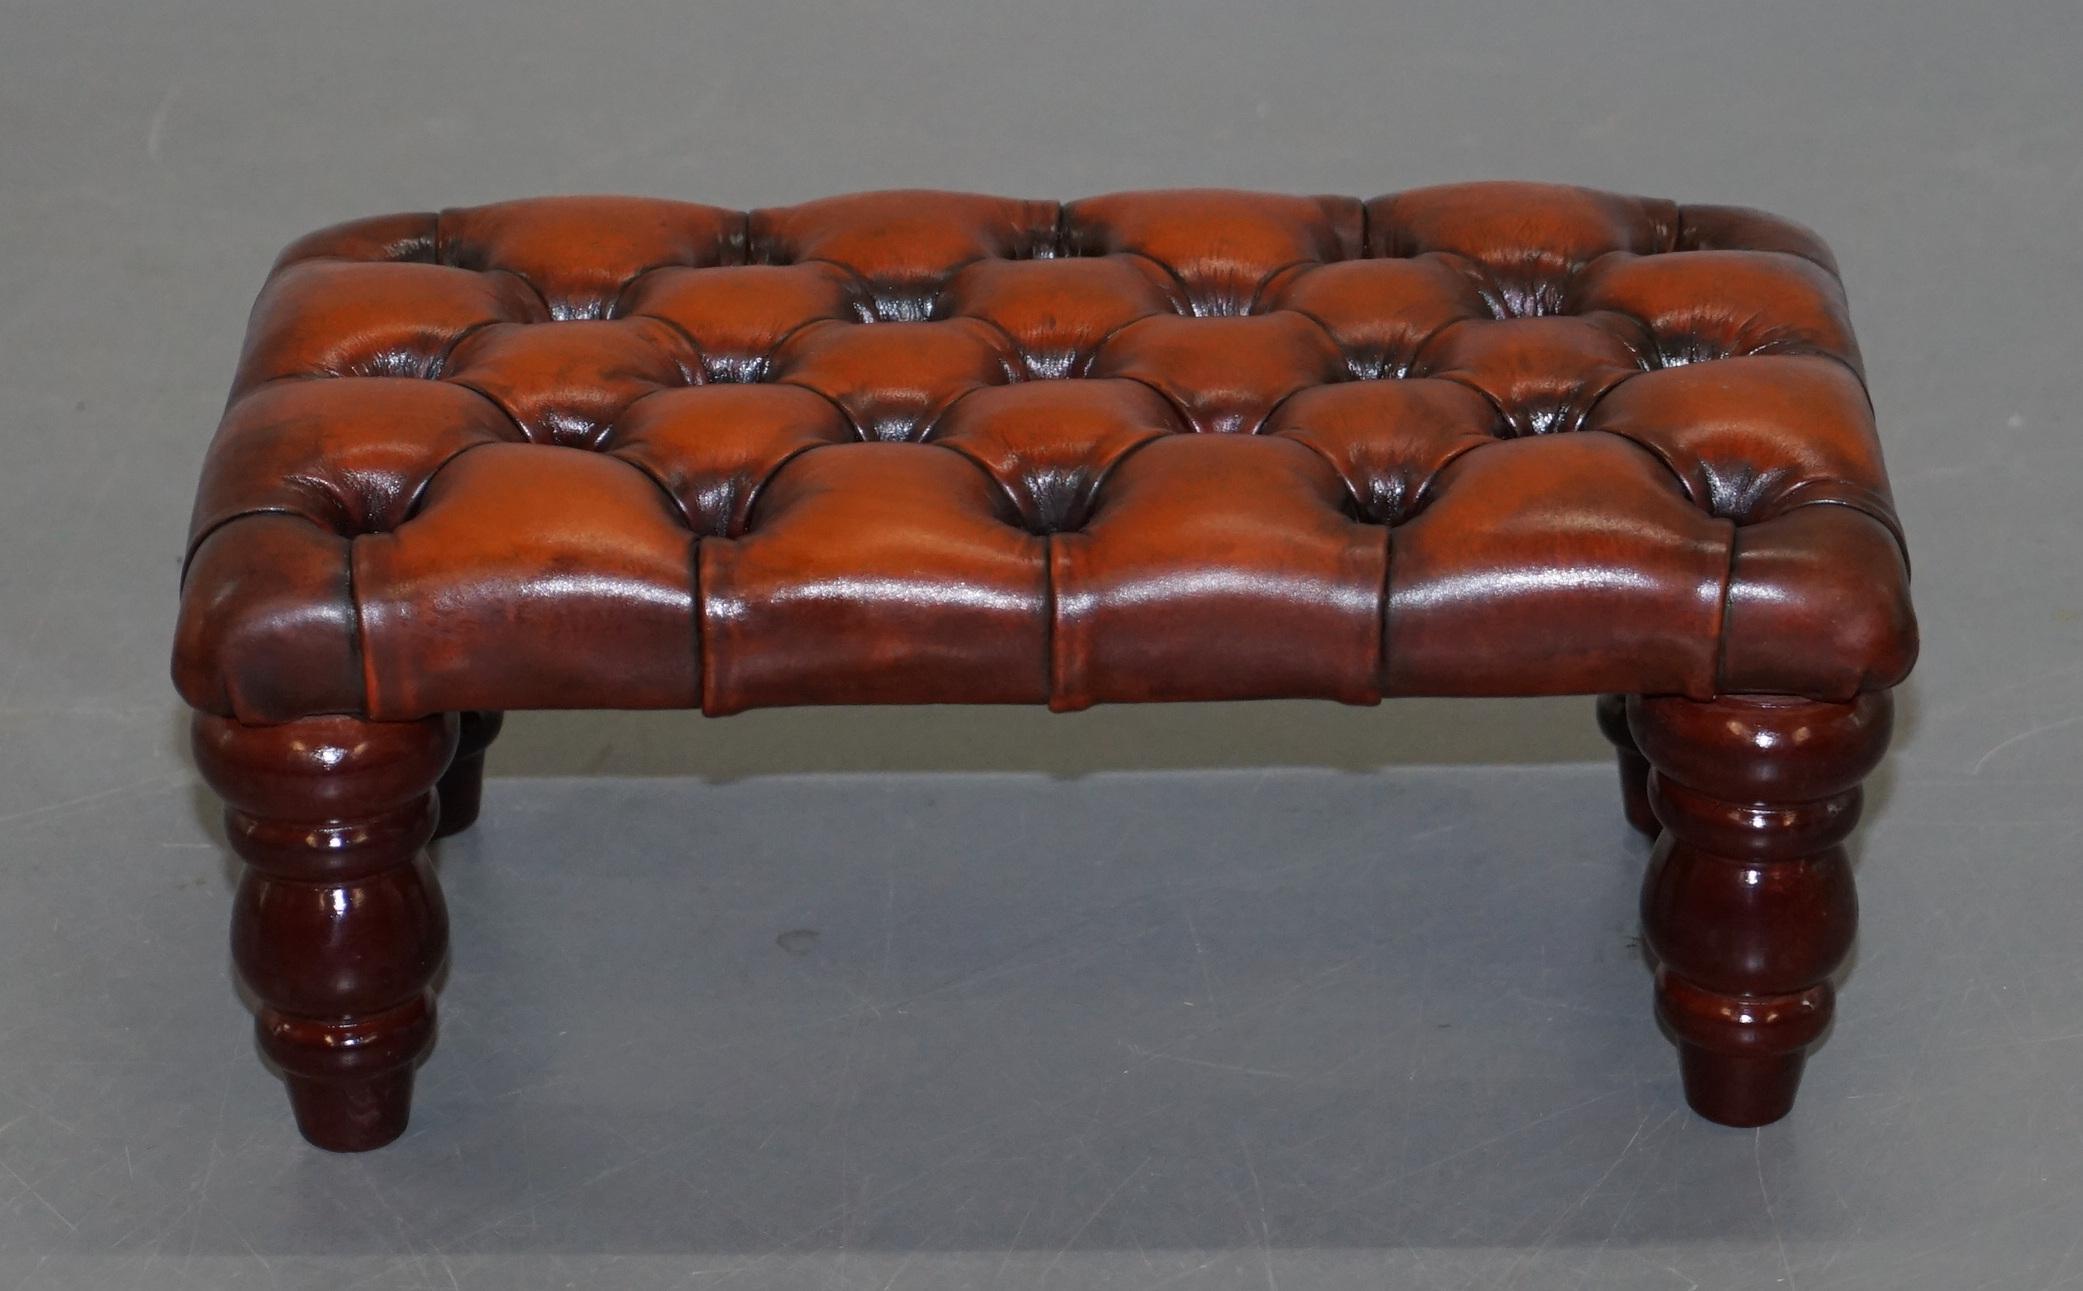 We are delighted to offer for sale this lovely fully restored hand dyed whisky brown leather footstool

A great piece, its a nice size so can slide under wingback chair legs. its been fully restored to include being hand dyed this lovely rich